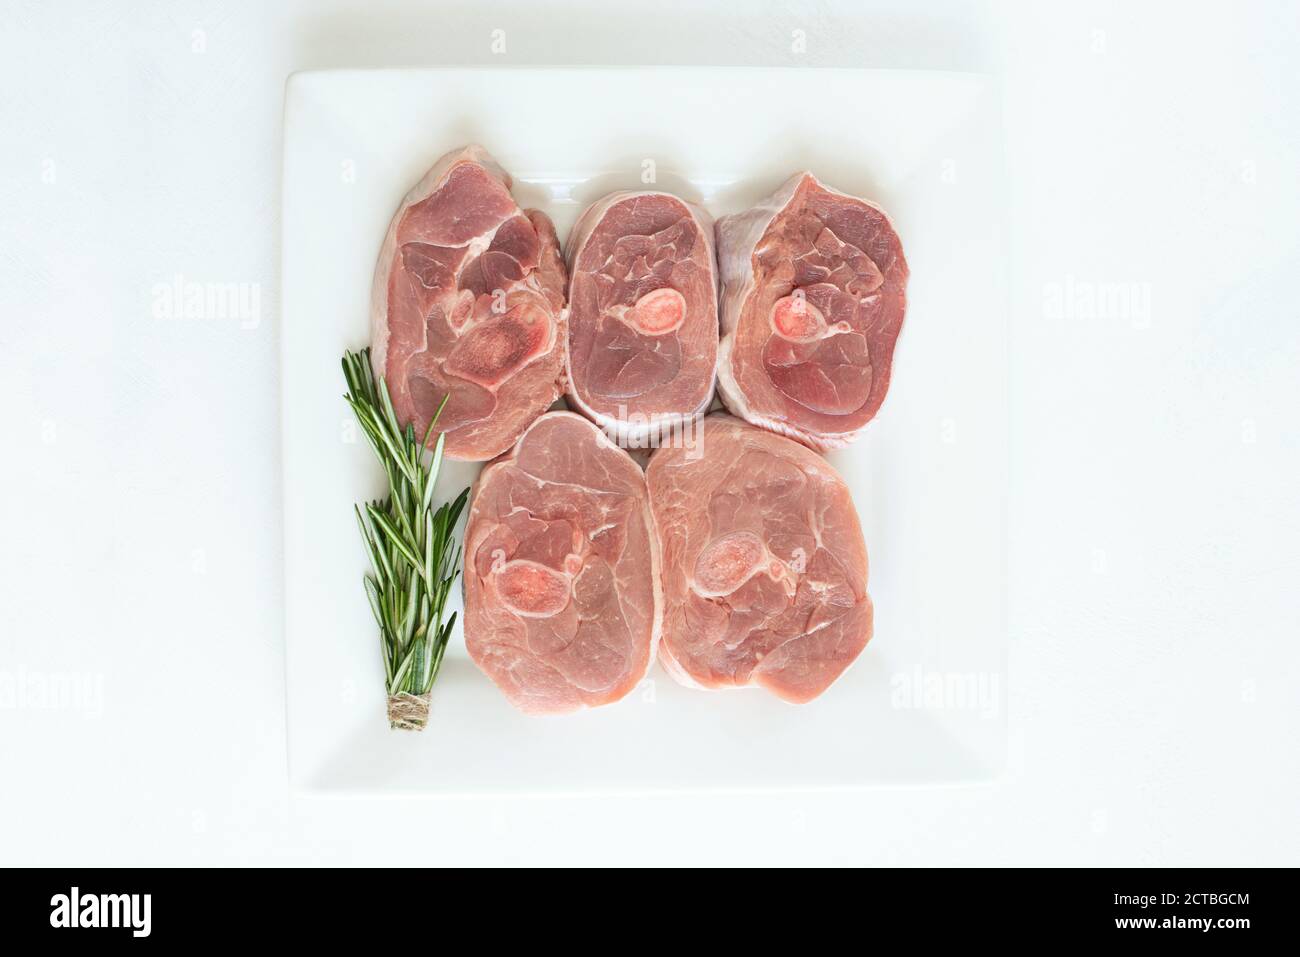 https://c8.alamy.com/comp/2CTBGCM/pieces-of-raw-turkey-meat-chopped-leg-steak-portioned-barbecue-pieces-on-white-background-with-a-sprig-of-rosemary-and-red-hot-pepper-isolate-2CTBGCM.jpg